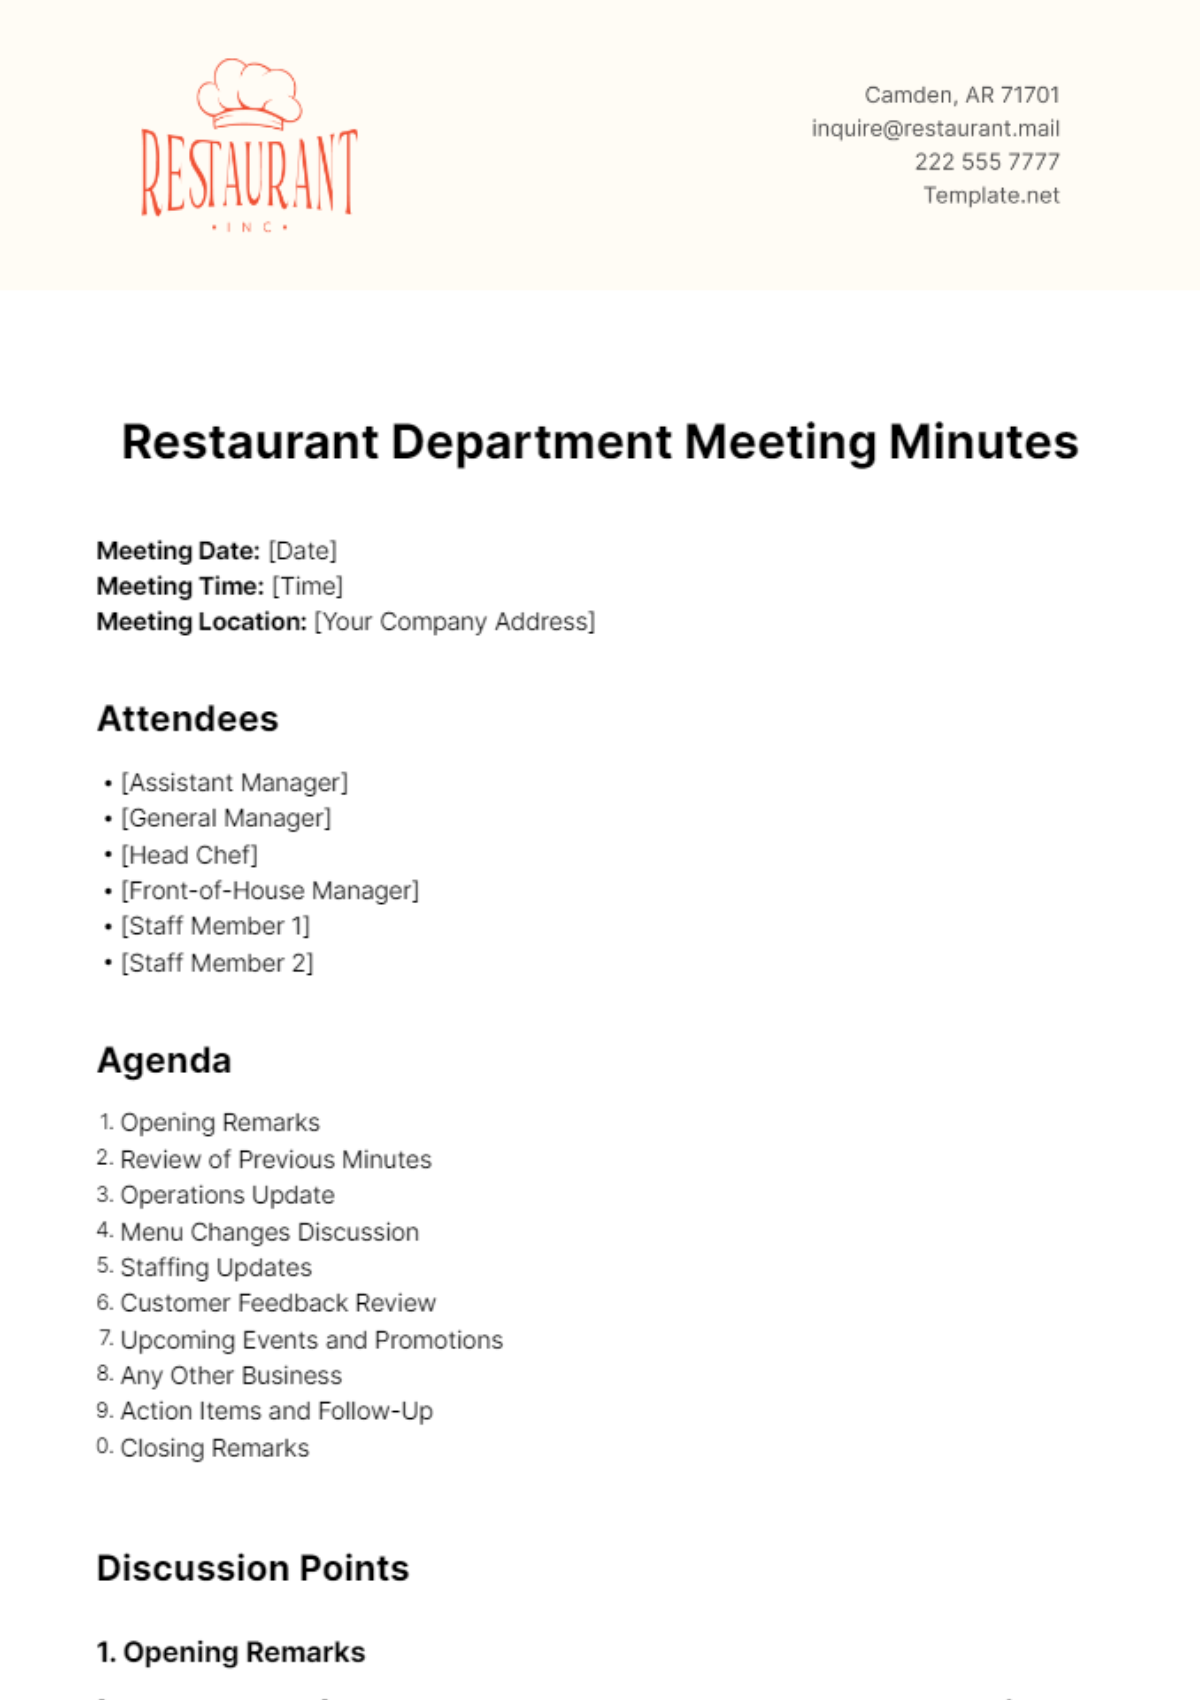 Free Restaurant Department Meeting Minutes Template